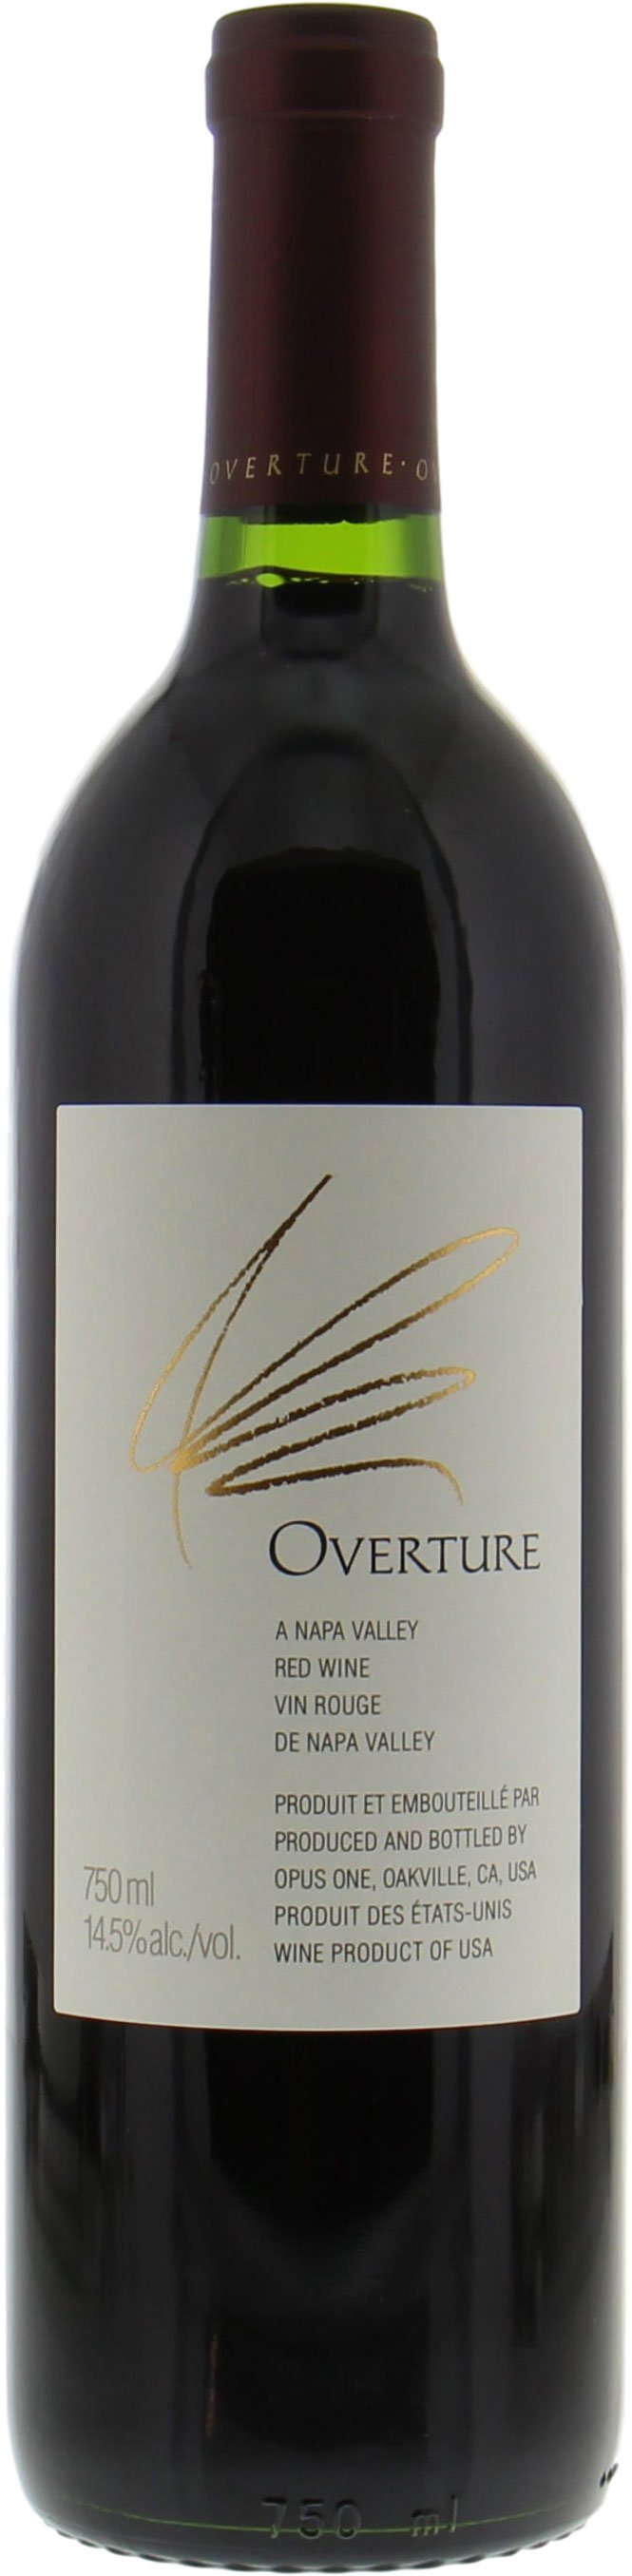 Opus One - Overture release 2017 2017 Perfect